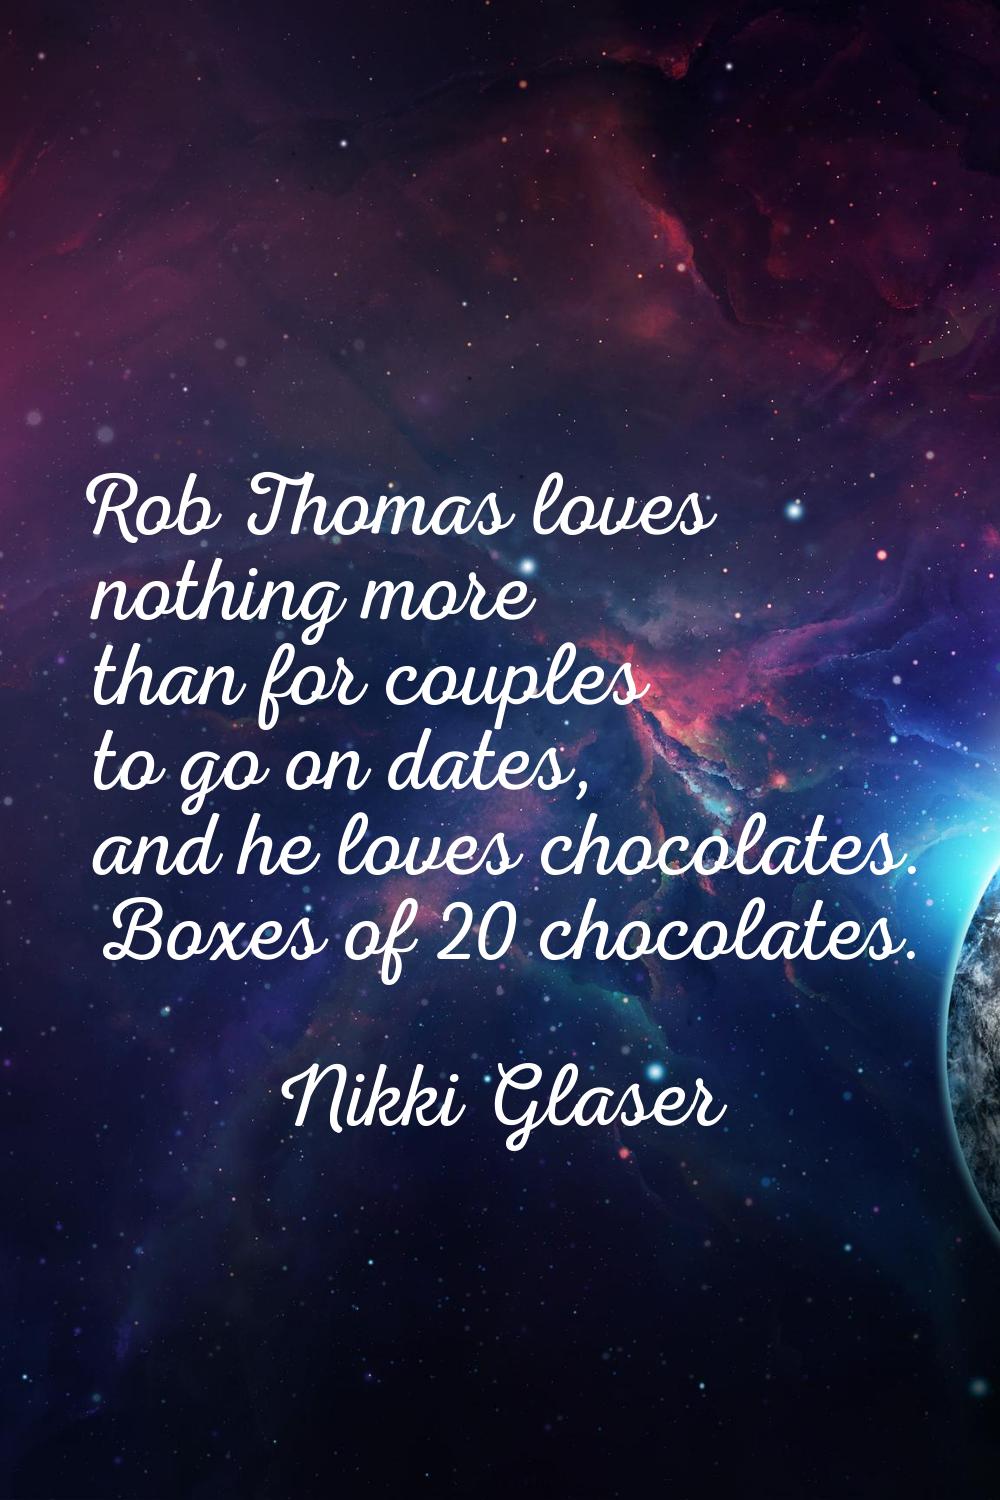 Rob Thomas loves nothing more than for couples to go on dates, and he loves chocolates. Boxes of 20